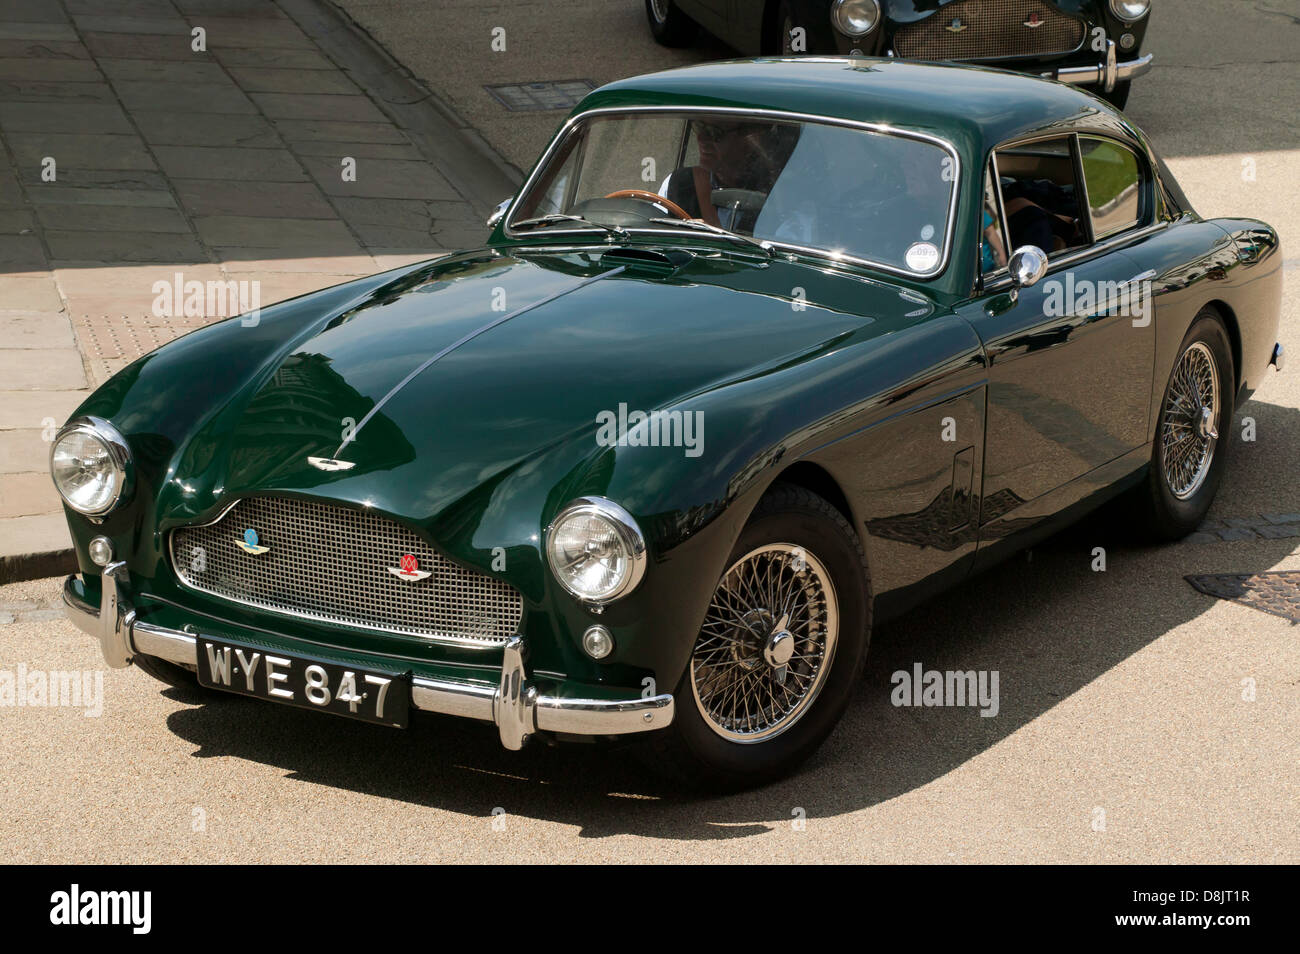 A beautiful example of a classic 1959, Green, Aston Martin DB3 on display at the Old Royal Naval College, Greenwich. Stock Photo